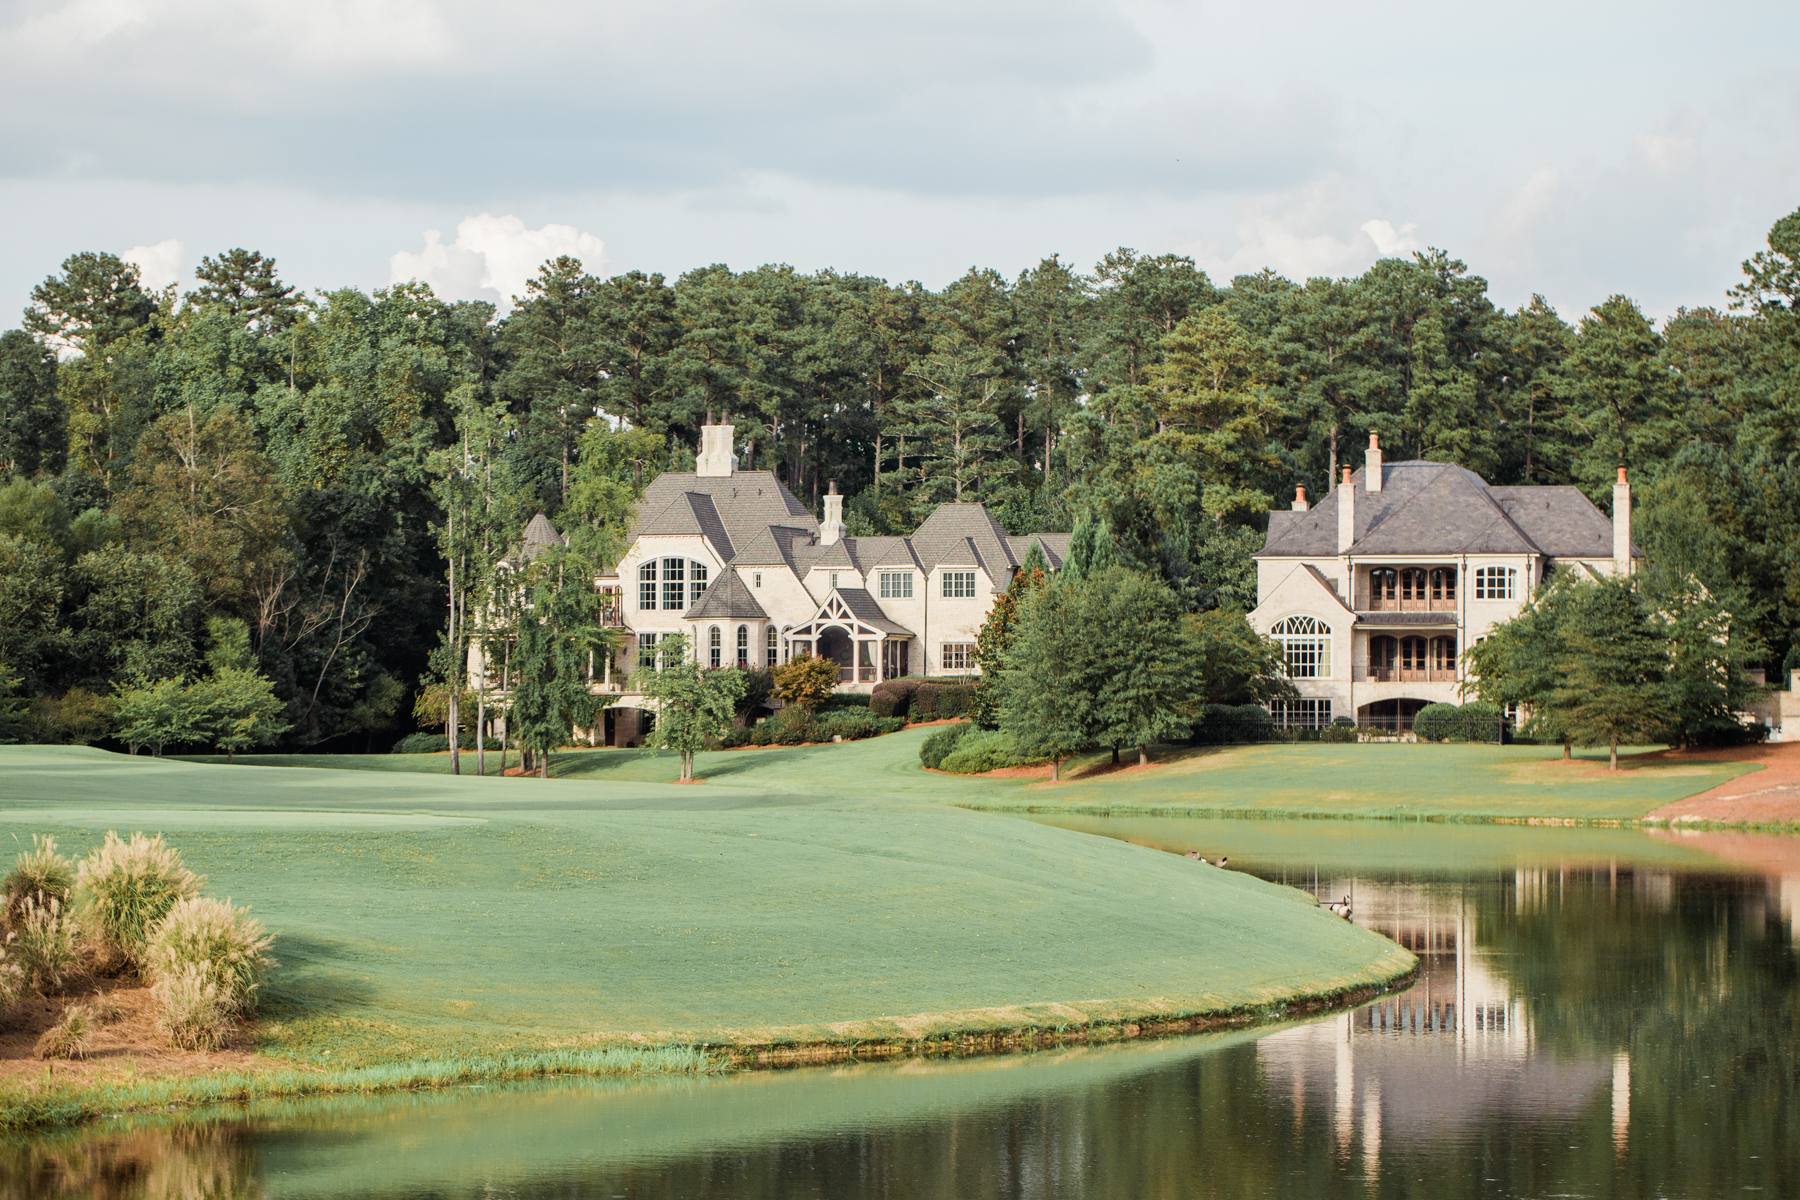 The homes at the River Club in Suwanee, Georgia are exquisite!